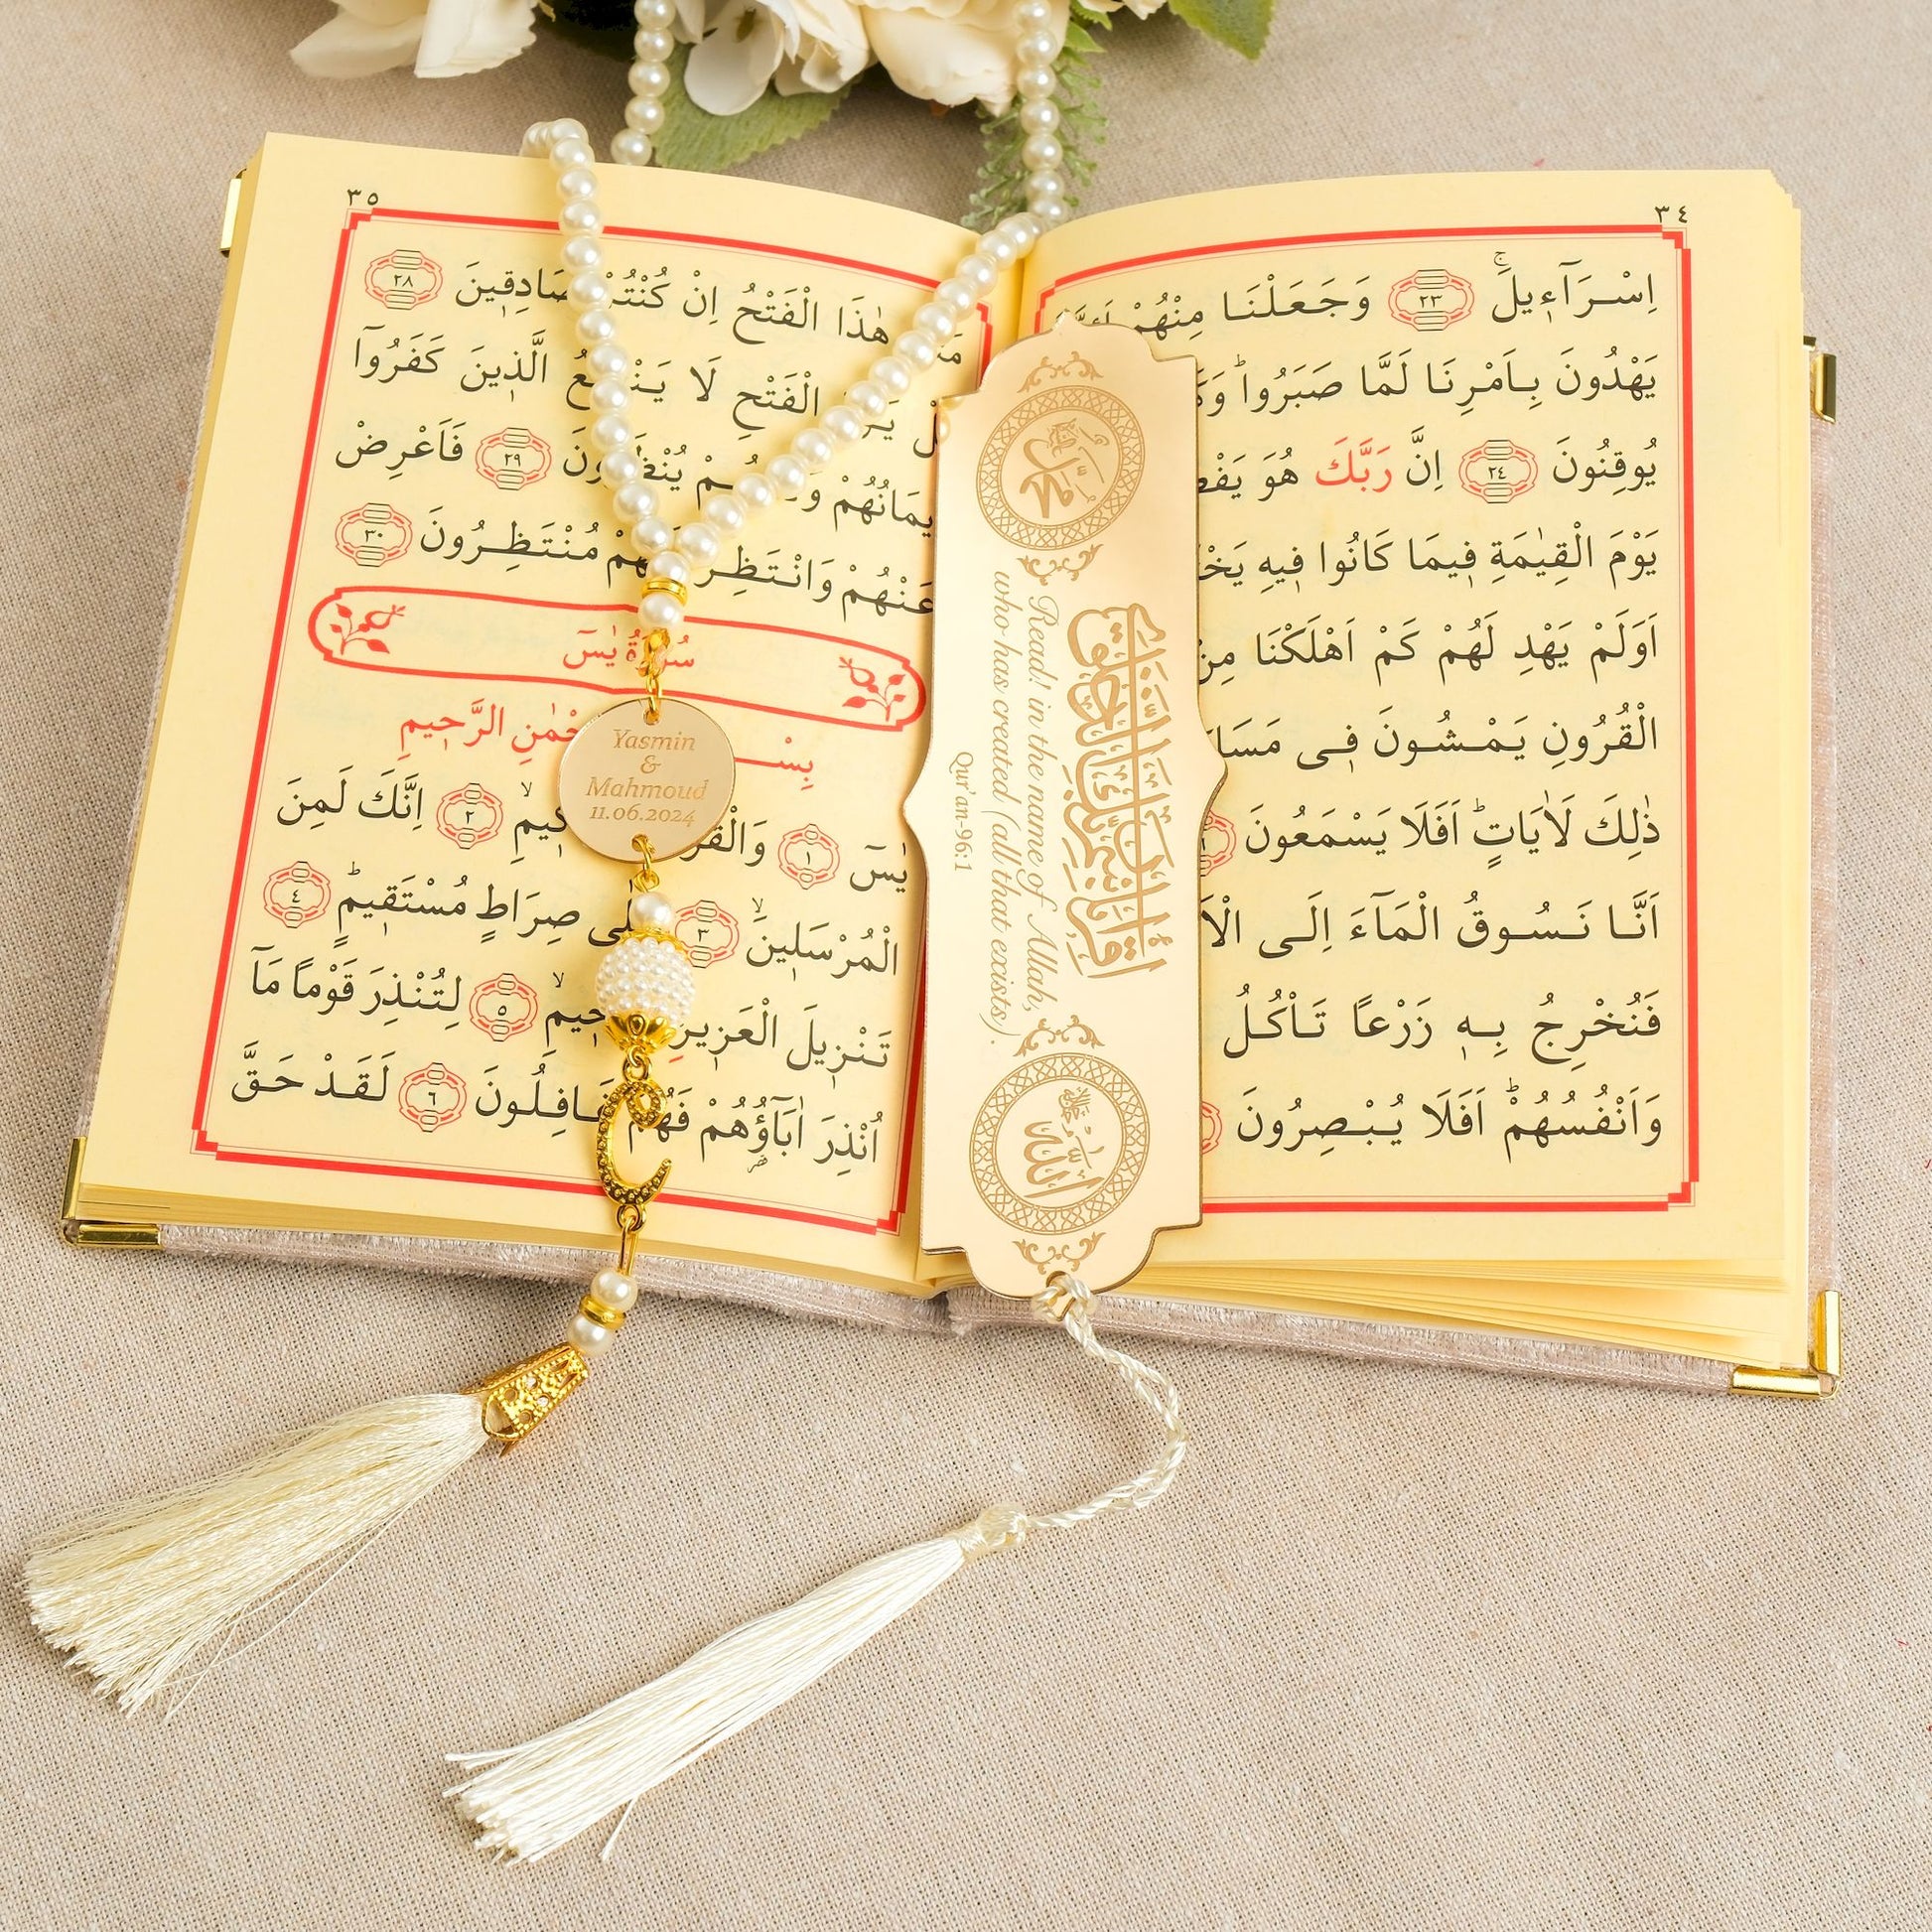 Personalized Velvet Dua Book Bookmark Tasbeeh Muslim Wedding Gift Set - Islamic Elite Favors is a handmade gift shop offering a wide variety of unique and personalized gifts for all occasions. Whether you're looking for the perfect Ramadan, Eid, Hajj, wedding gift or something special for a birthday, baby shower or anniversary, we have something for everyone. High quality, made with love.